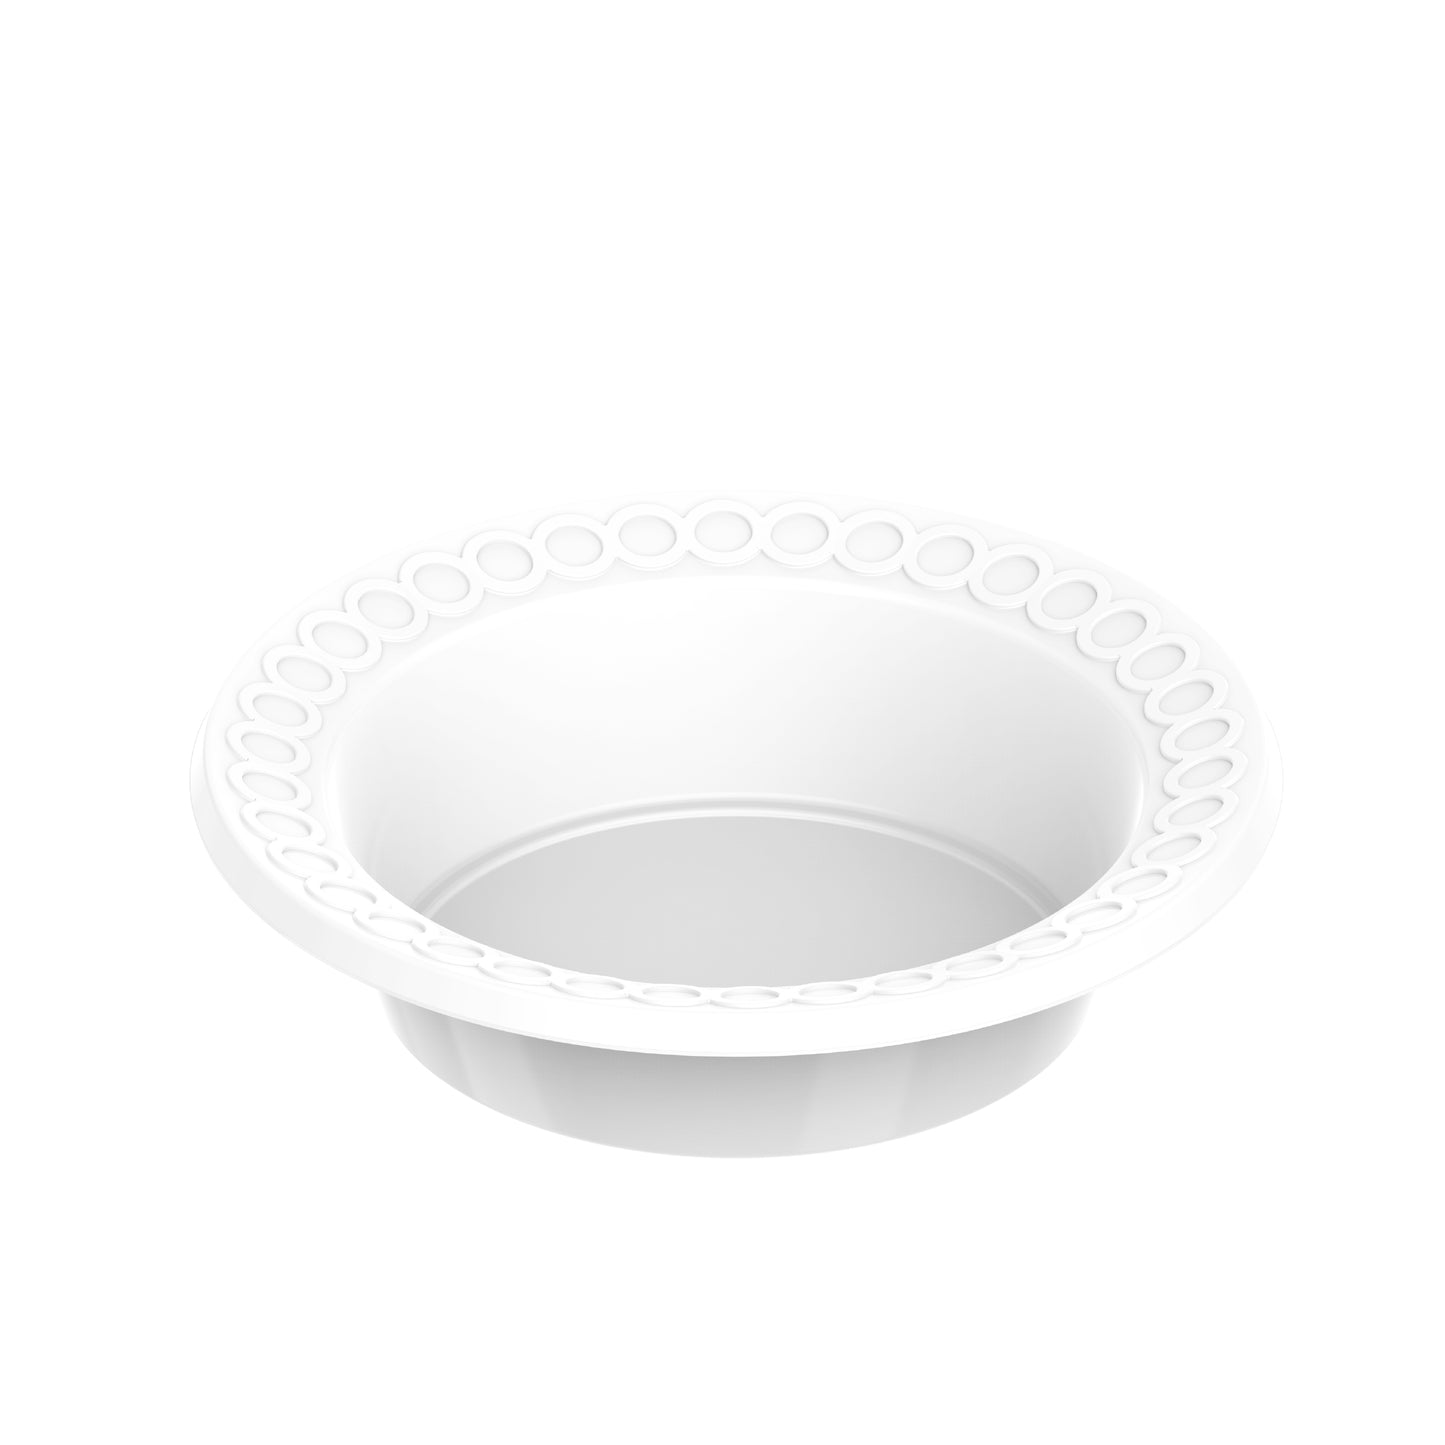 15 oz Pack of 25 Plastic Round Bowls